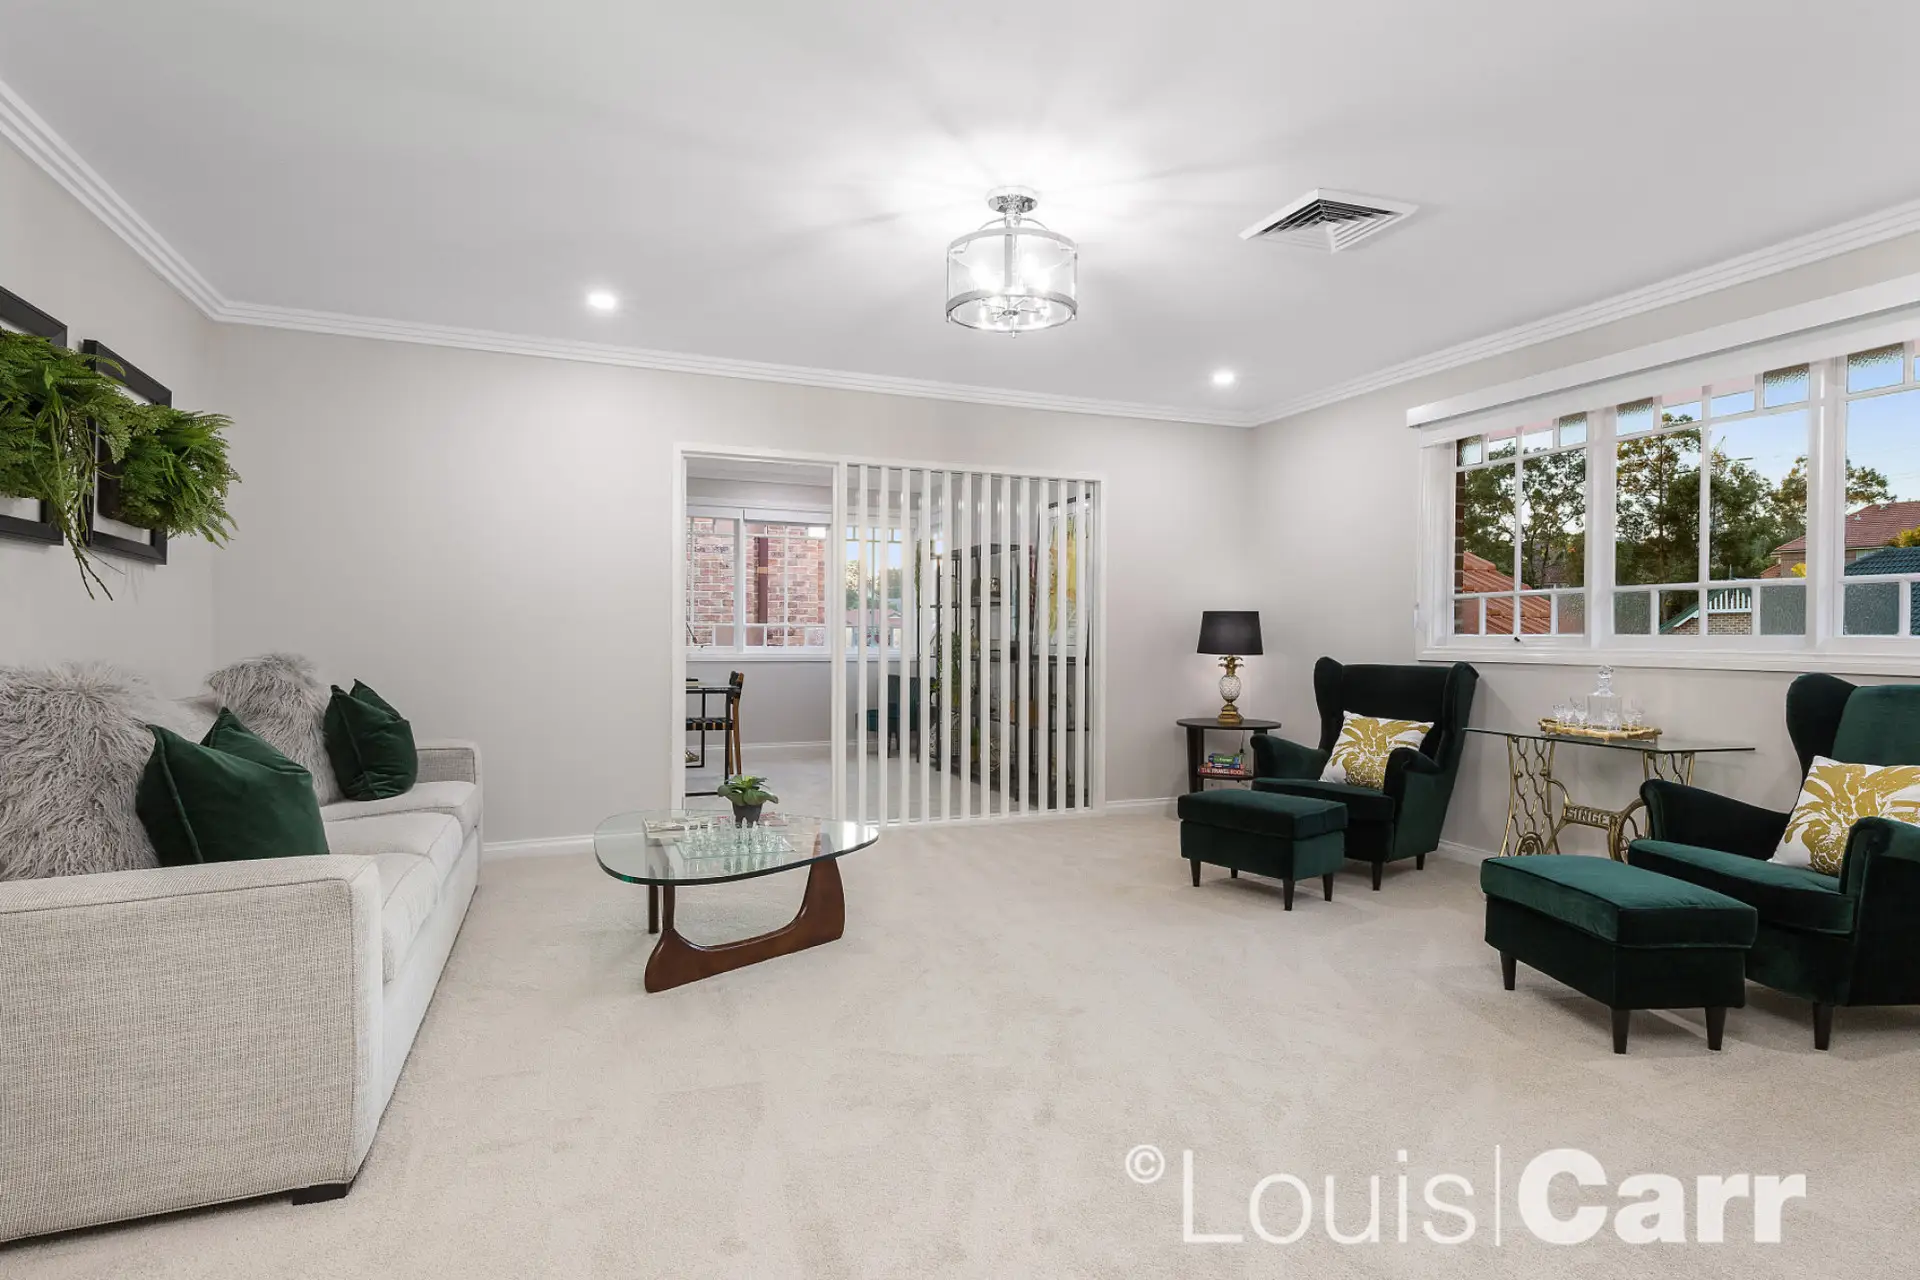 Photo #7: 11 Avonleigh Way, West Pennant Hills - Sold by Louis Carr Real Estate